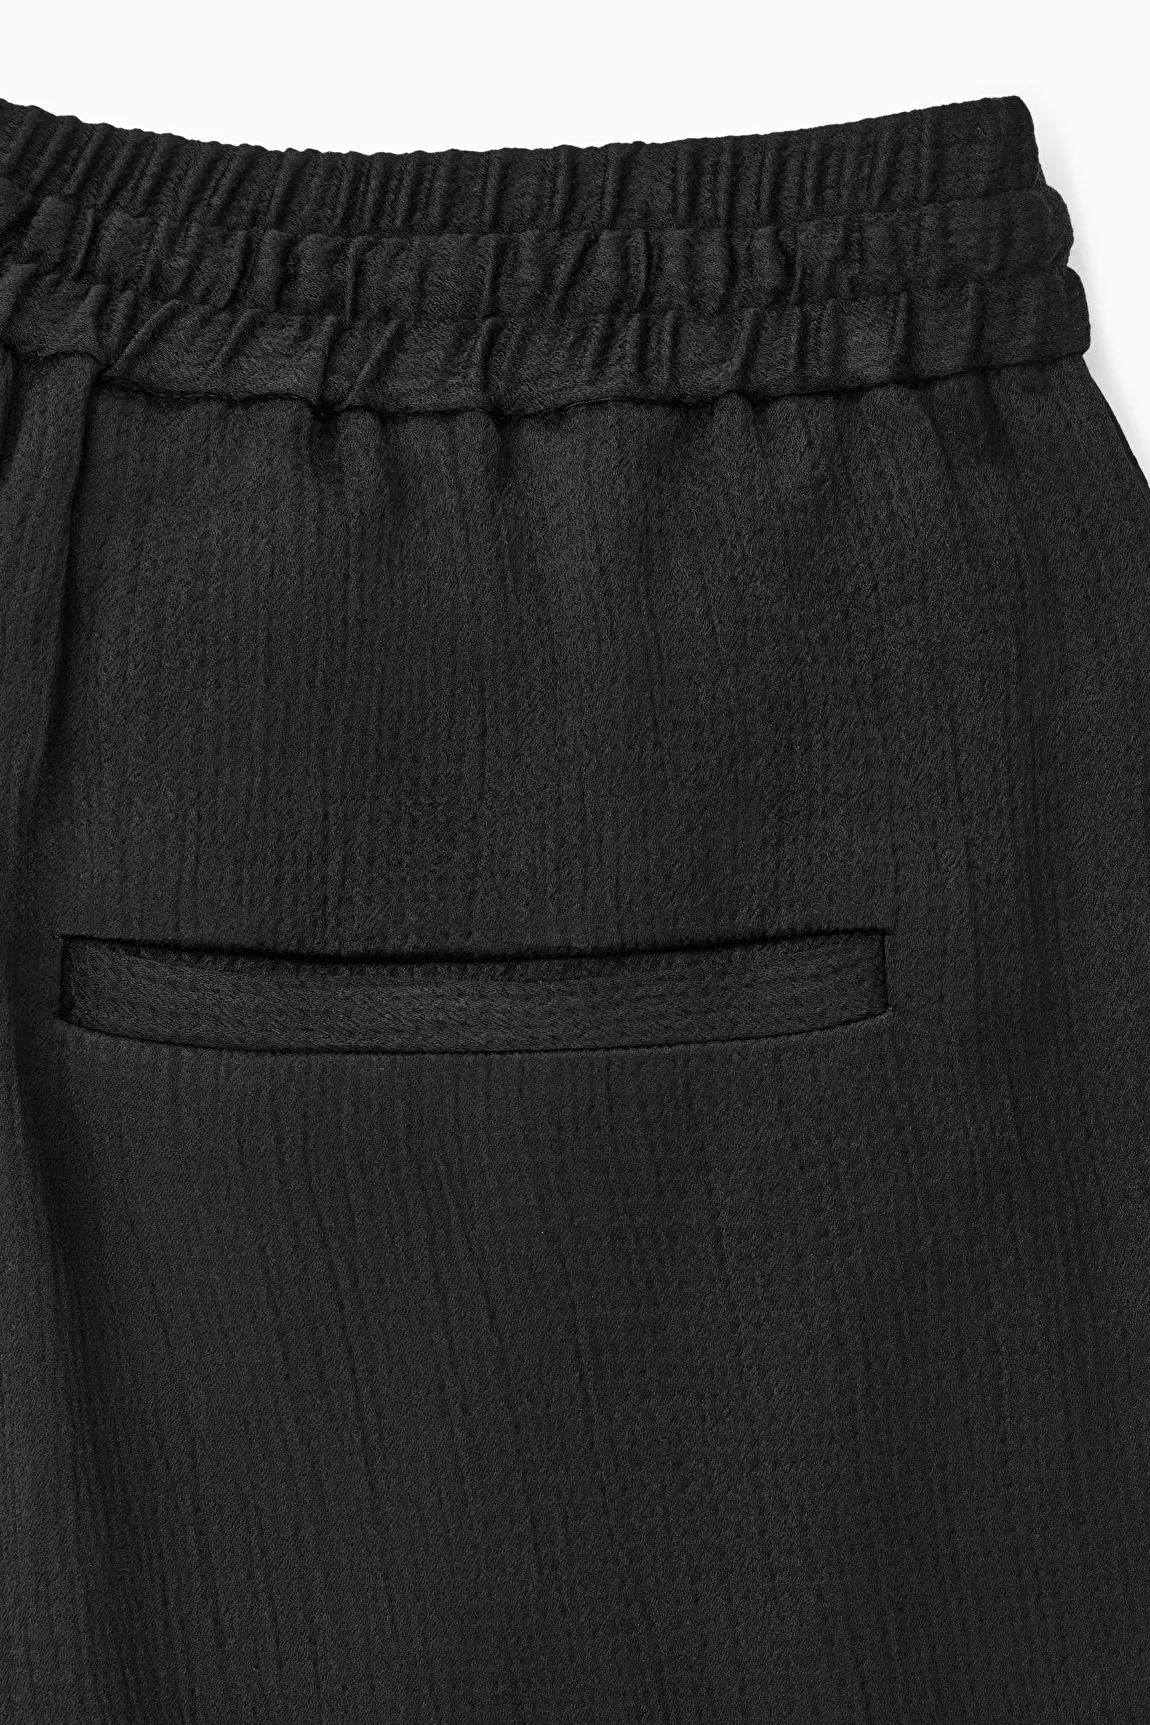 TEXTURED WIDE-LEG DRAWSTRING PANTS - BLACK - Trousers - COS | COS (US)